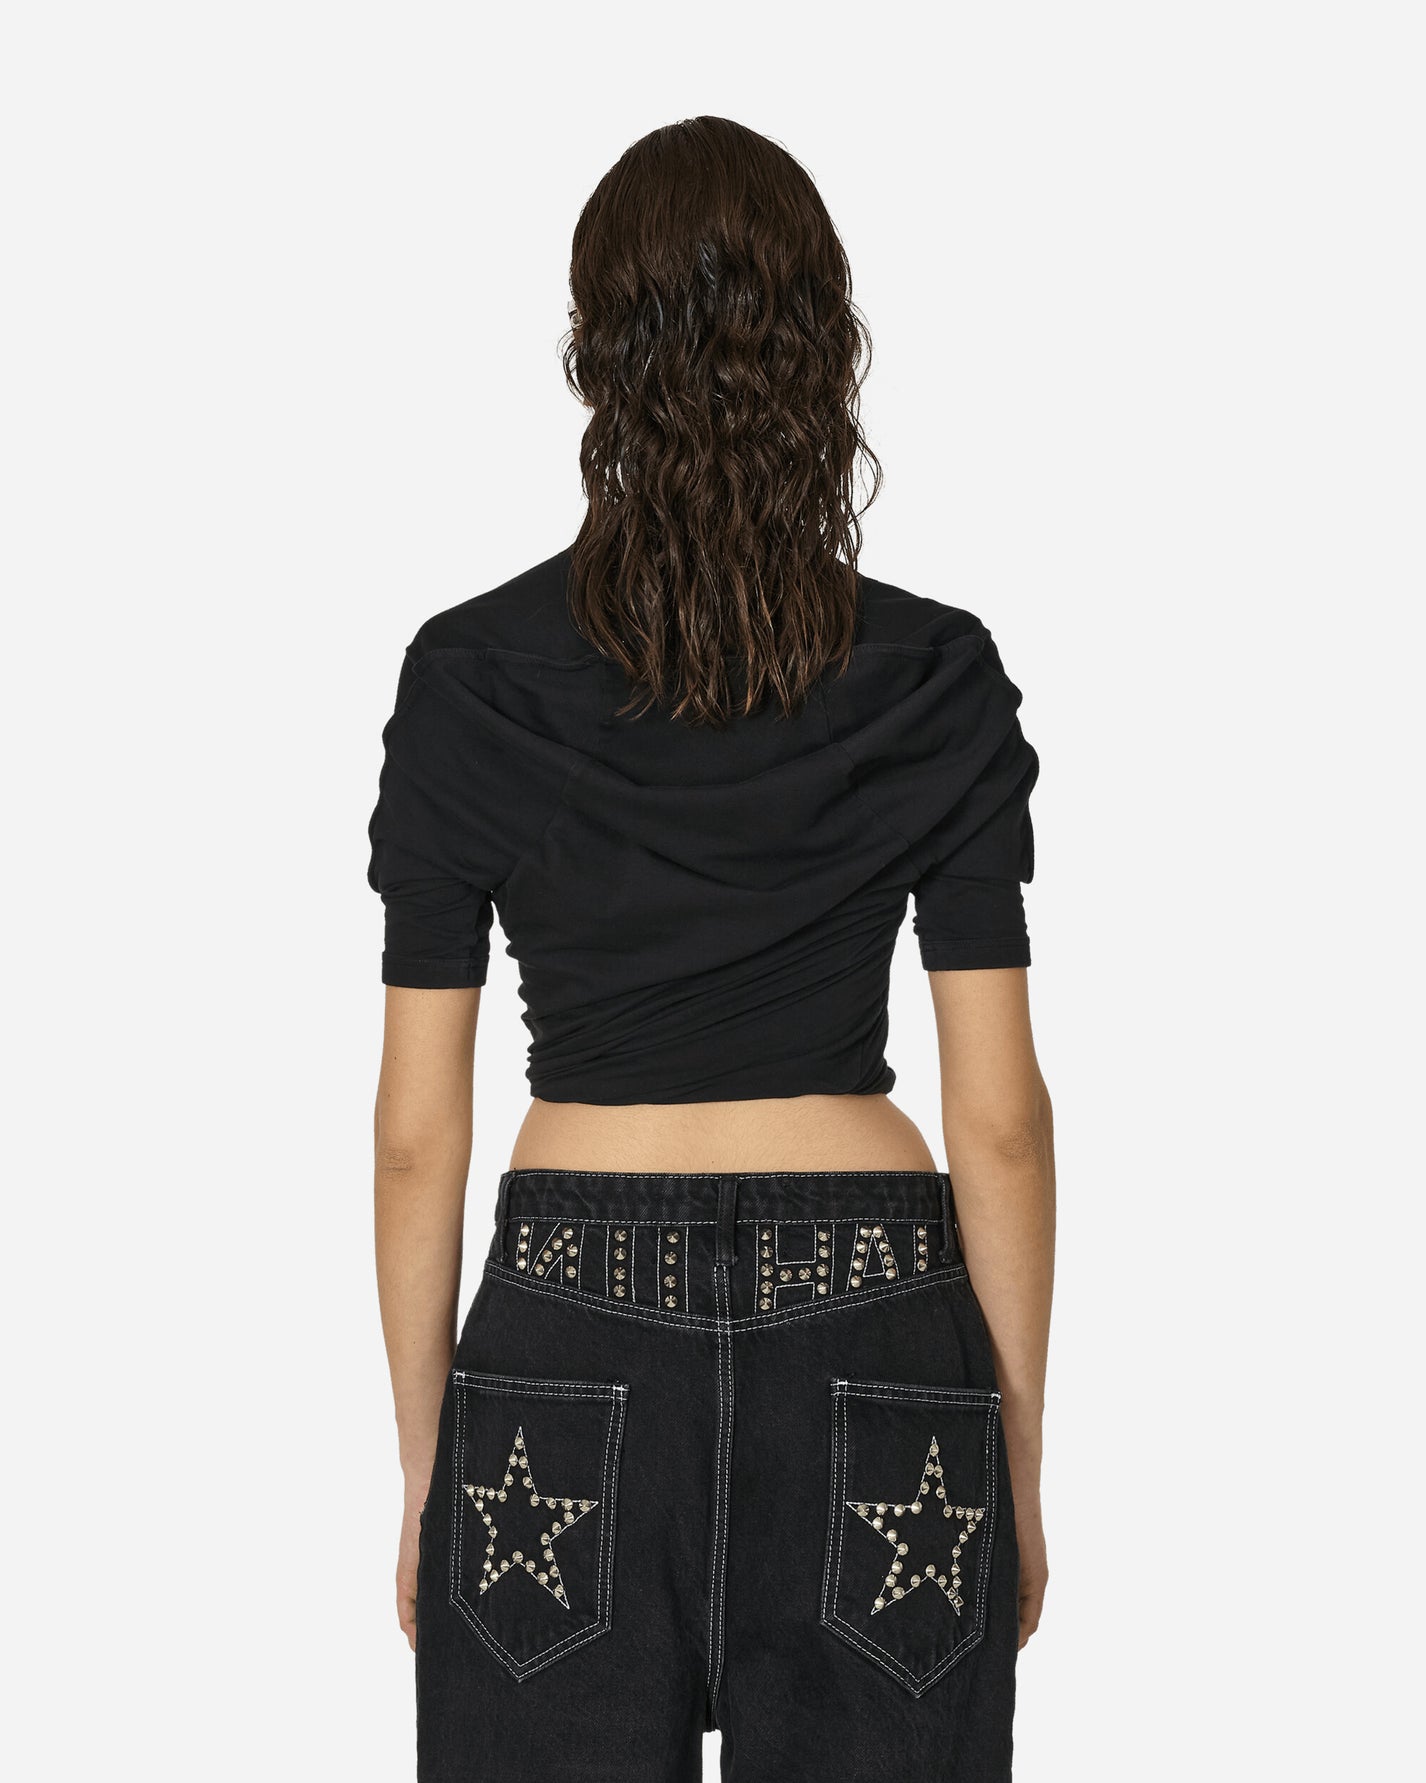 Jean Paul Gaultier Wmns Jersey Twisted Ringer Tee With Breast Faded Black T-Shirts Shortsleeve TS070I-J062 00A